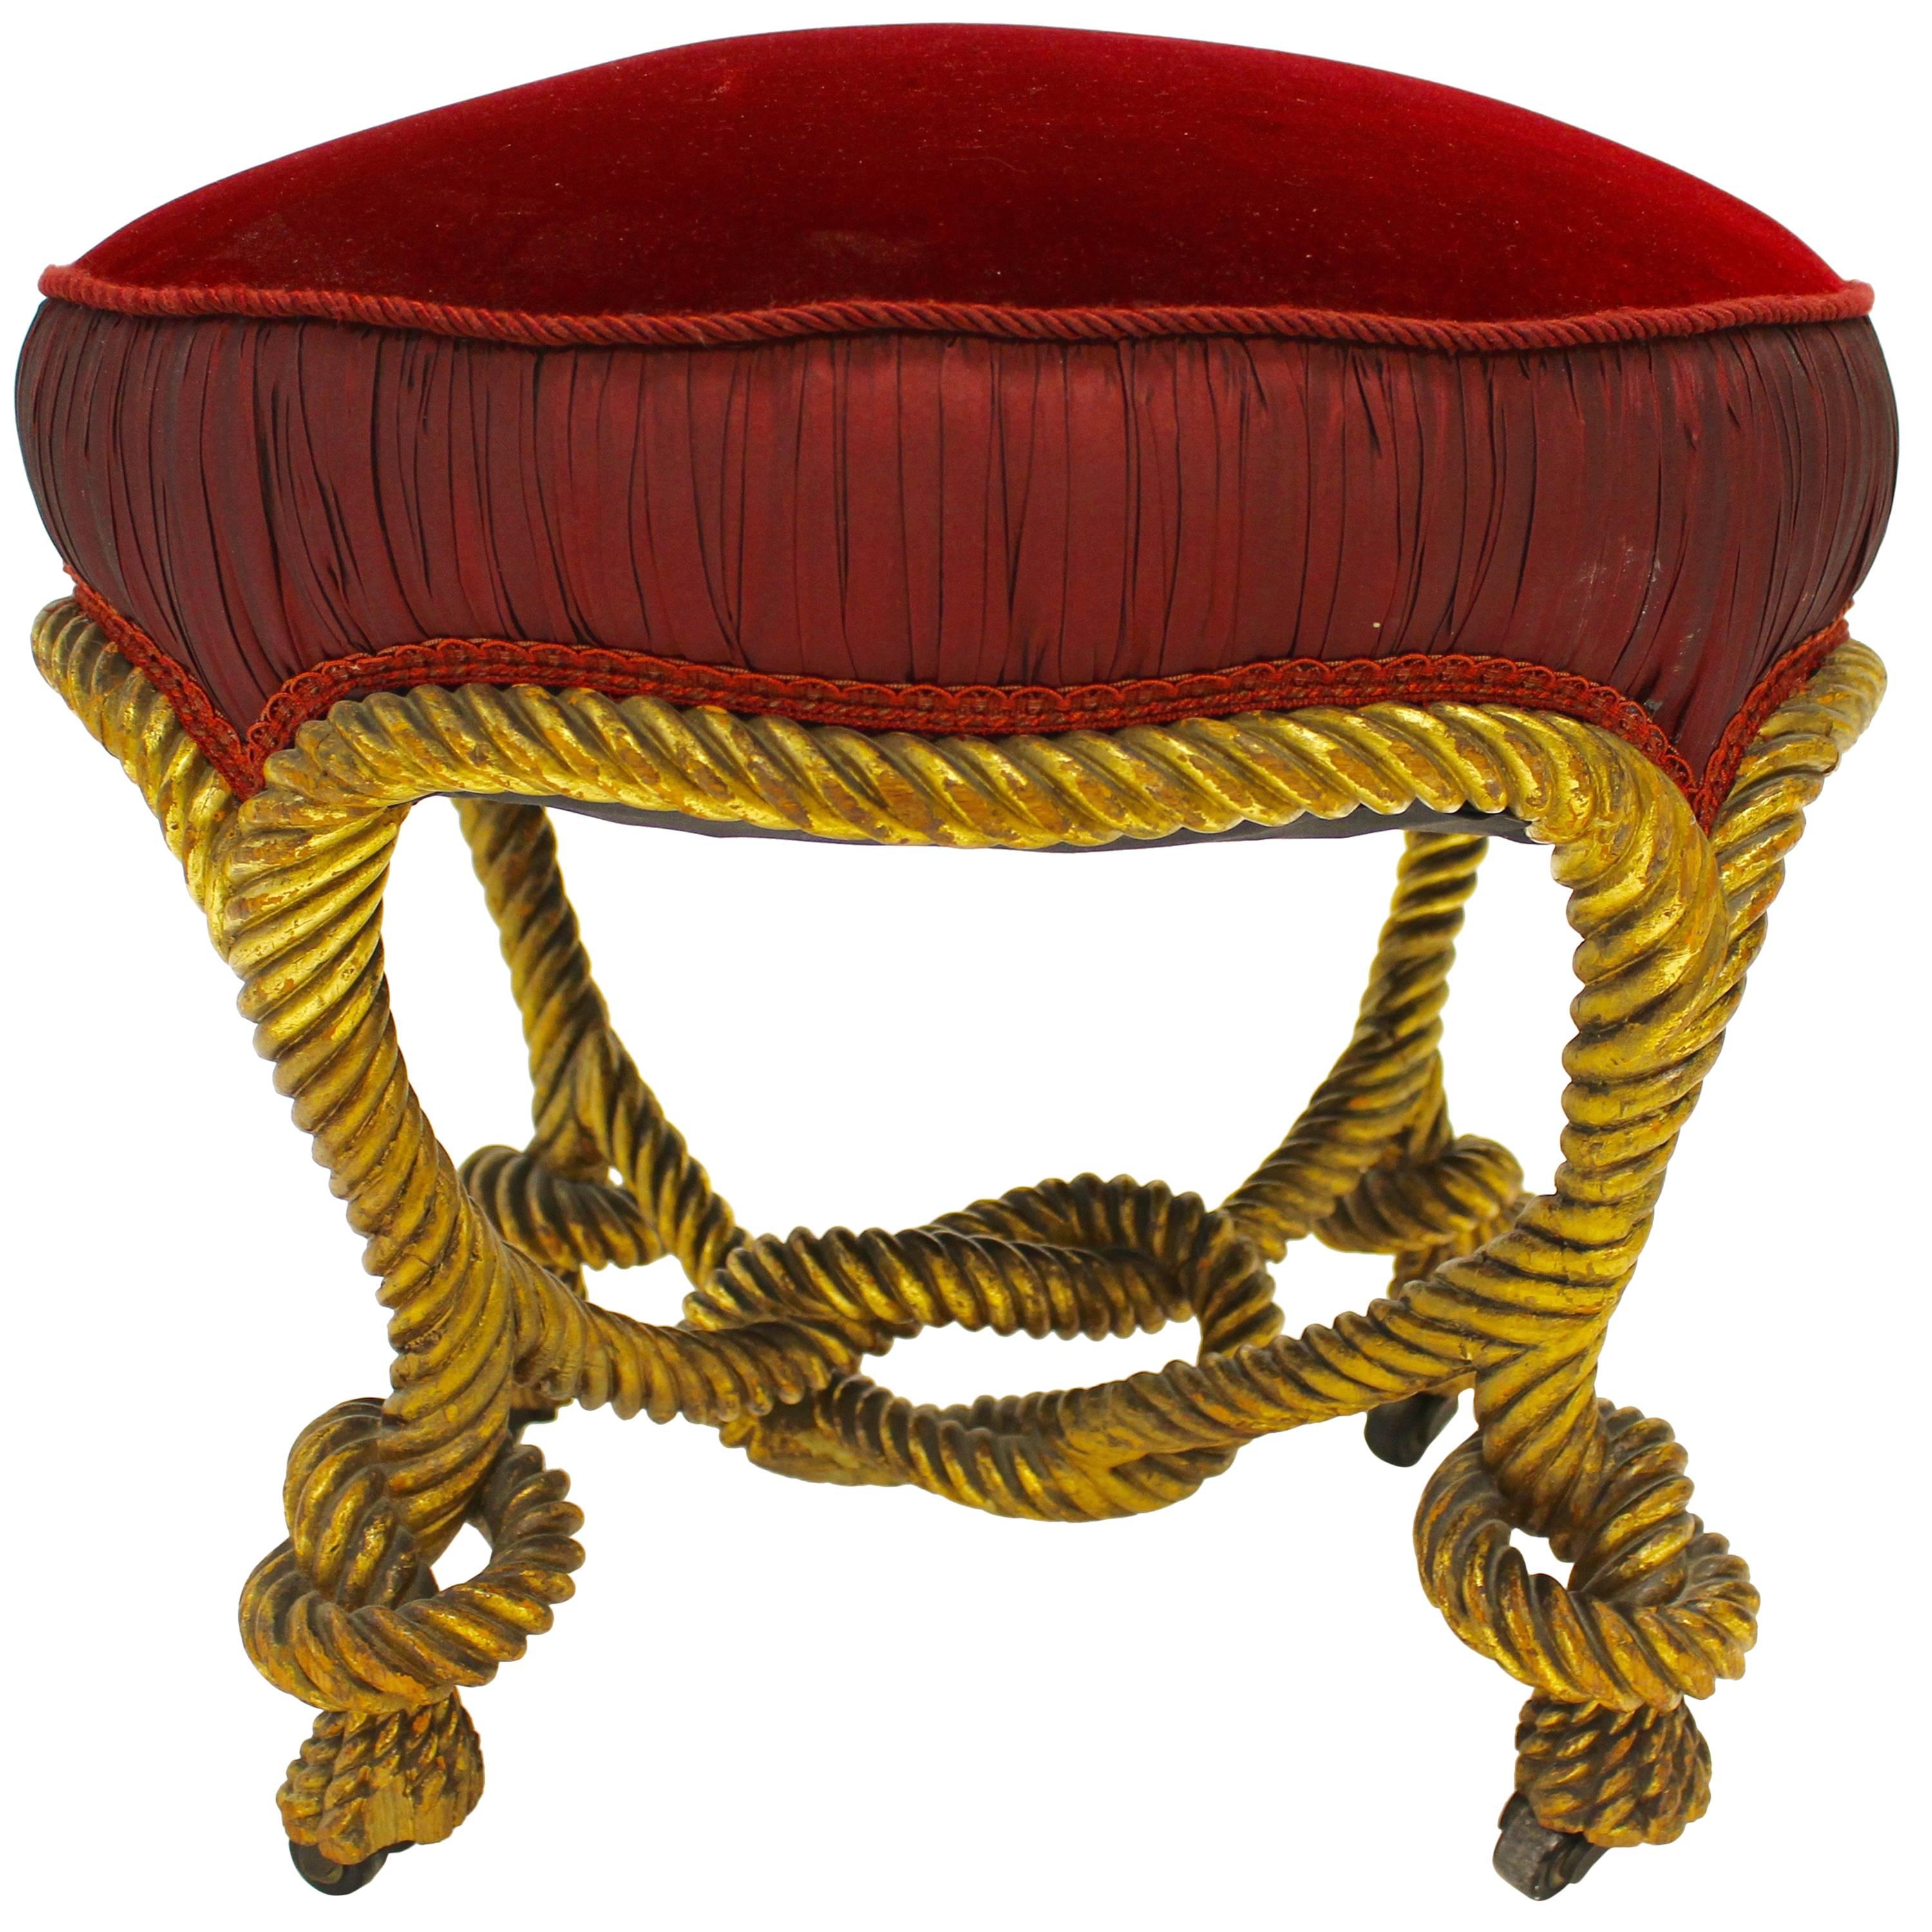 French Napoleon III Style Giltwood Rope Stool with Circular Red Velvet Seat For Sale